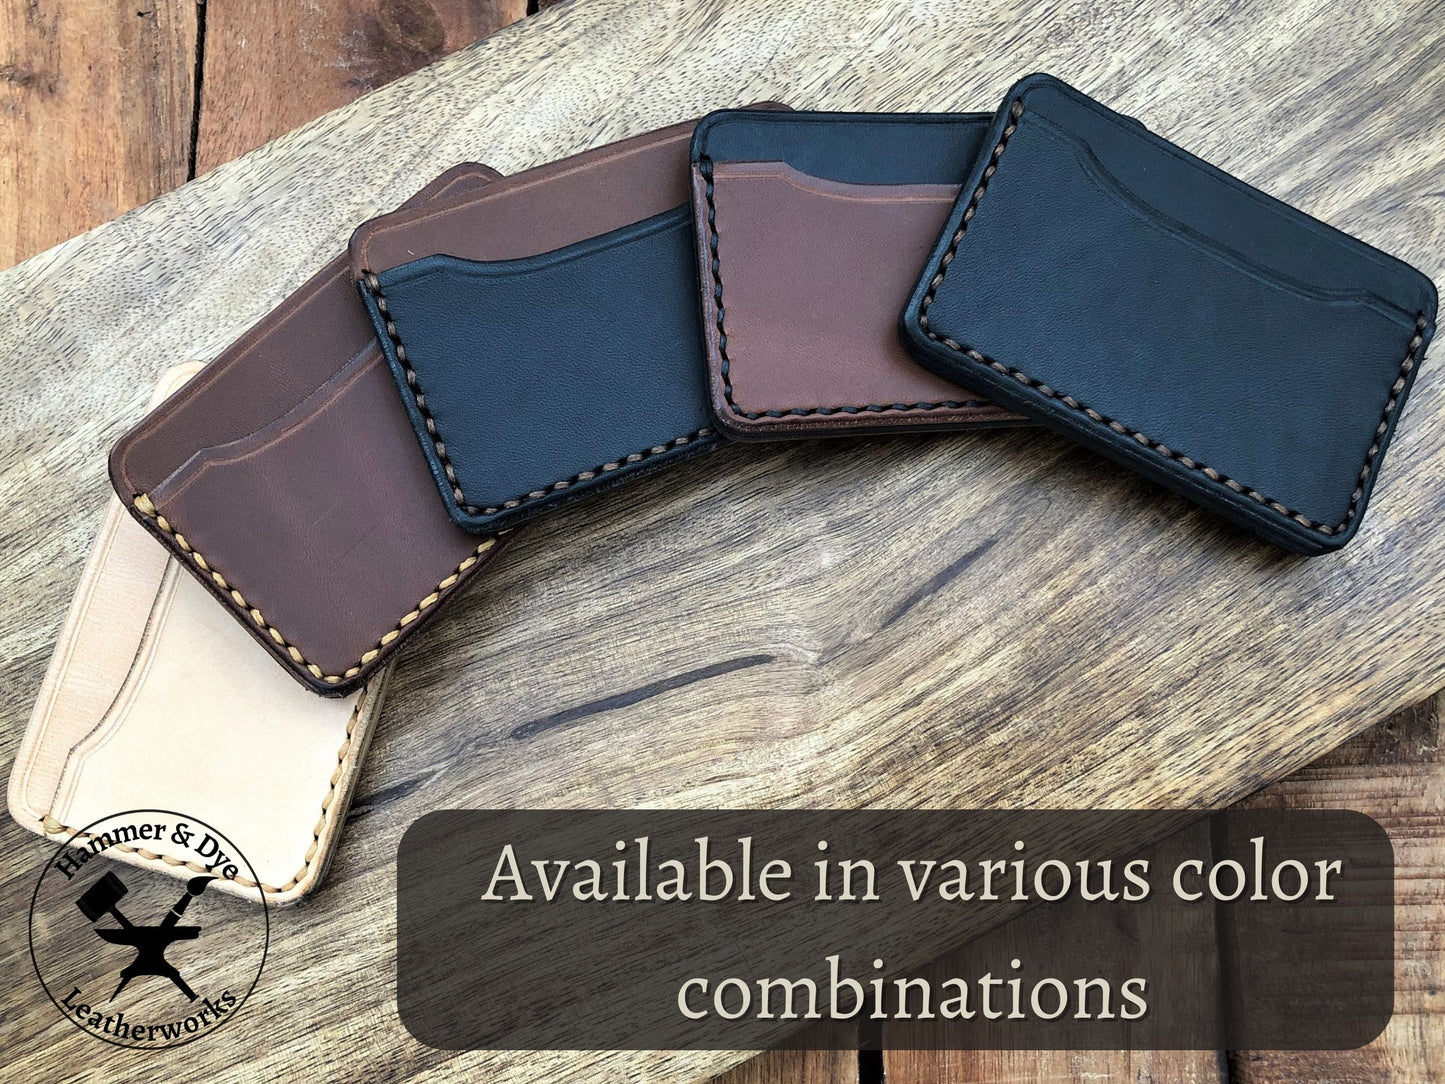 5 different color combinations of the handmade minimalist leather card wallet